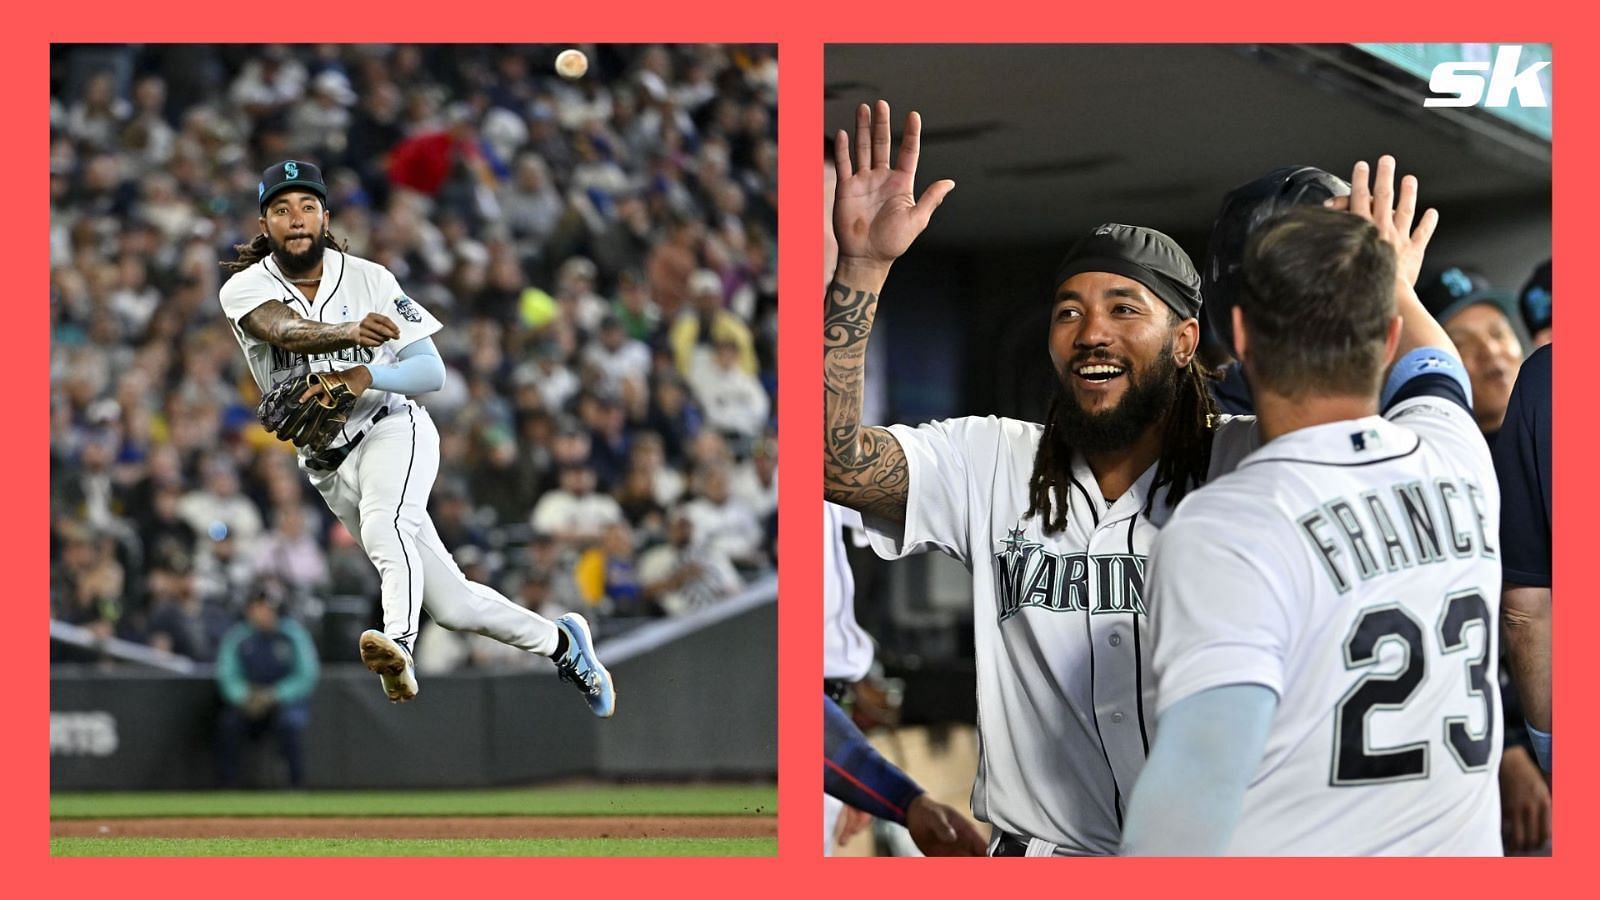 What happened to JP Crawford? Mariners shortstop pulled early from